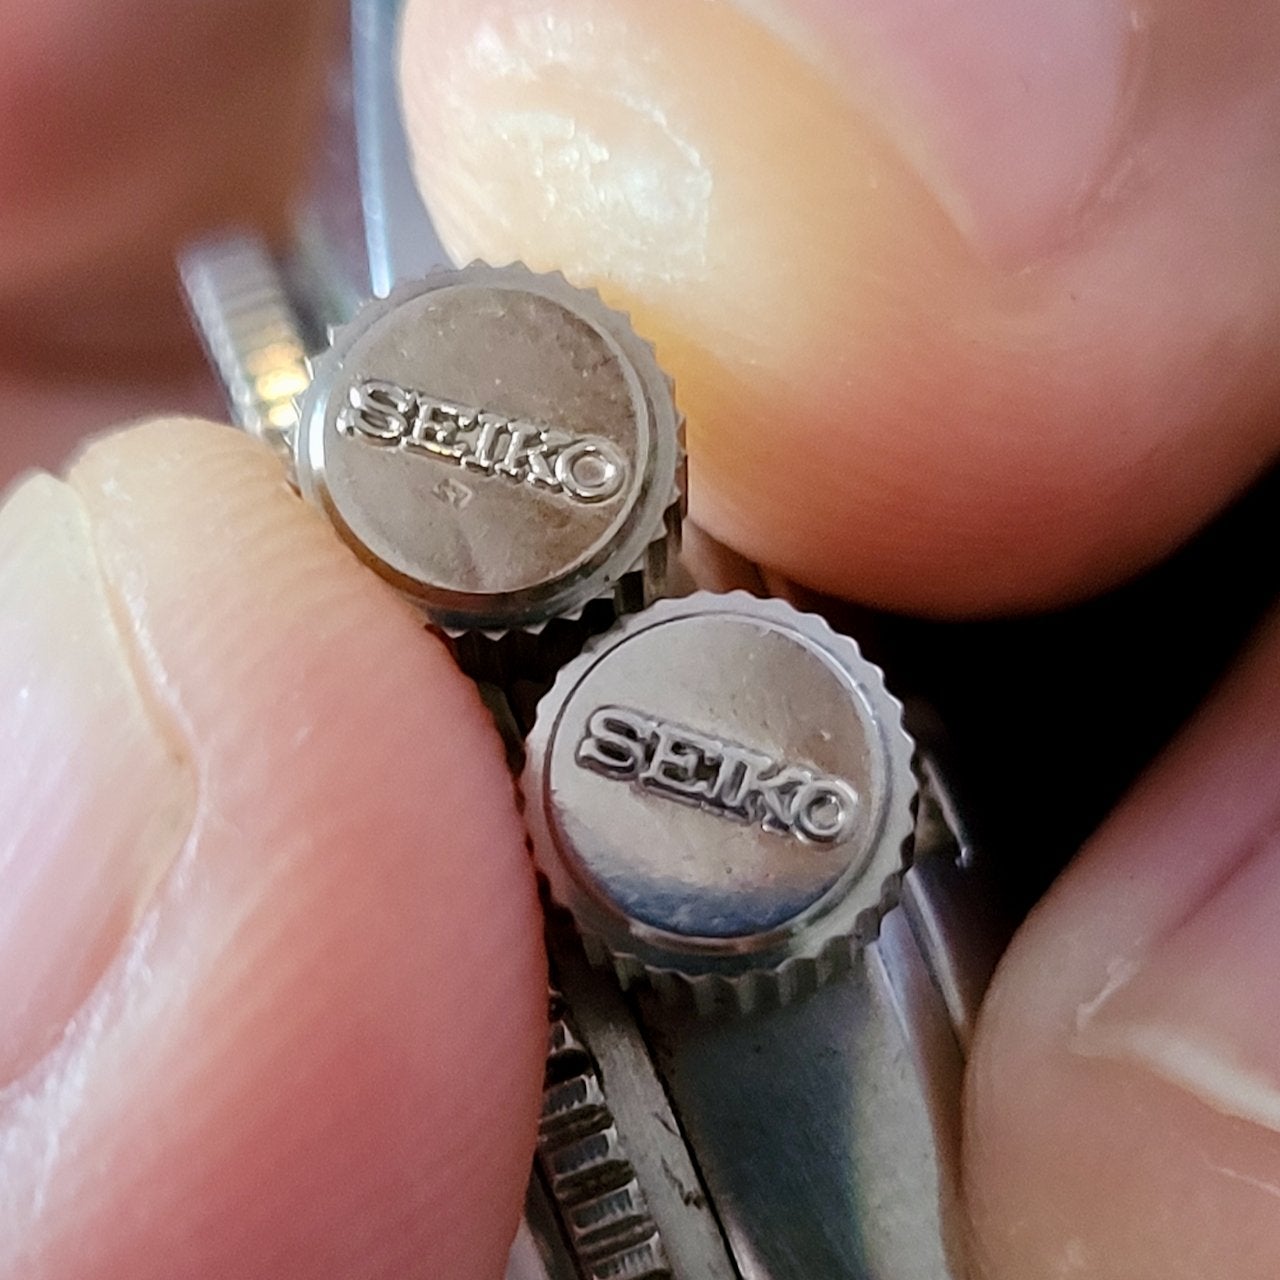 Seiko 6105-8000 crown - legit or not? | The Watch Site